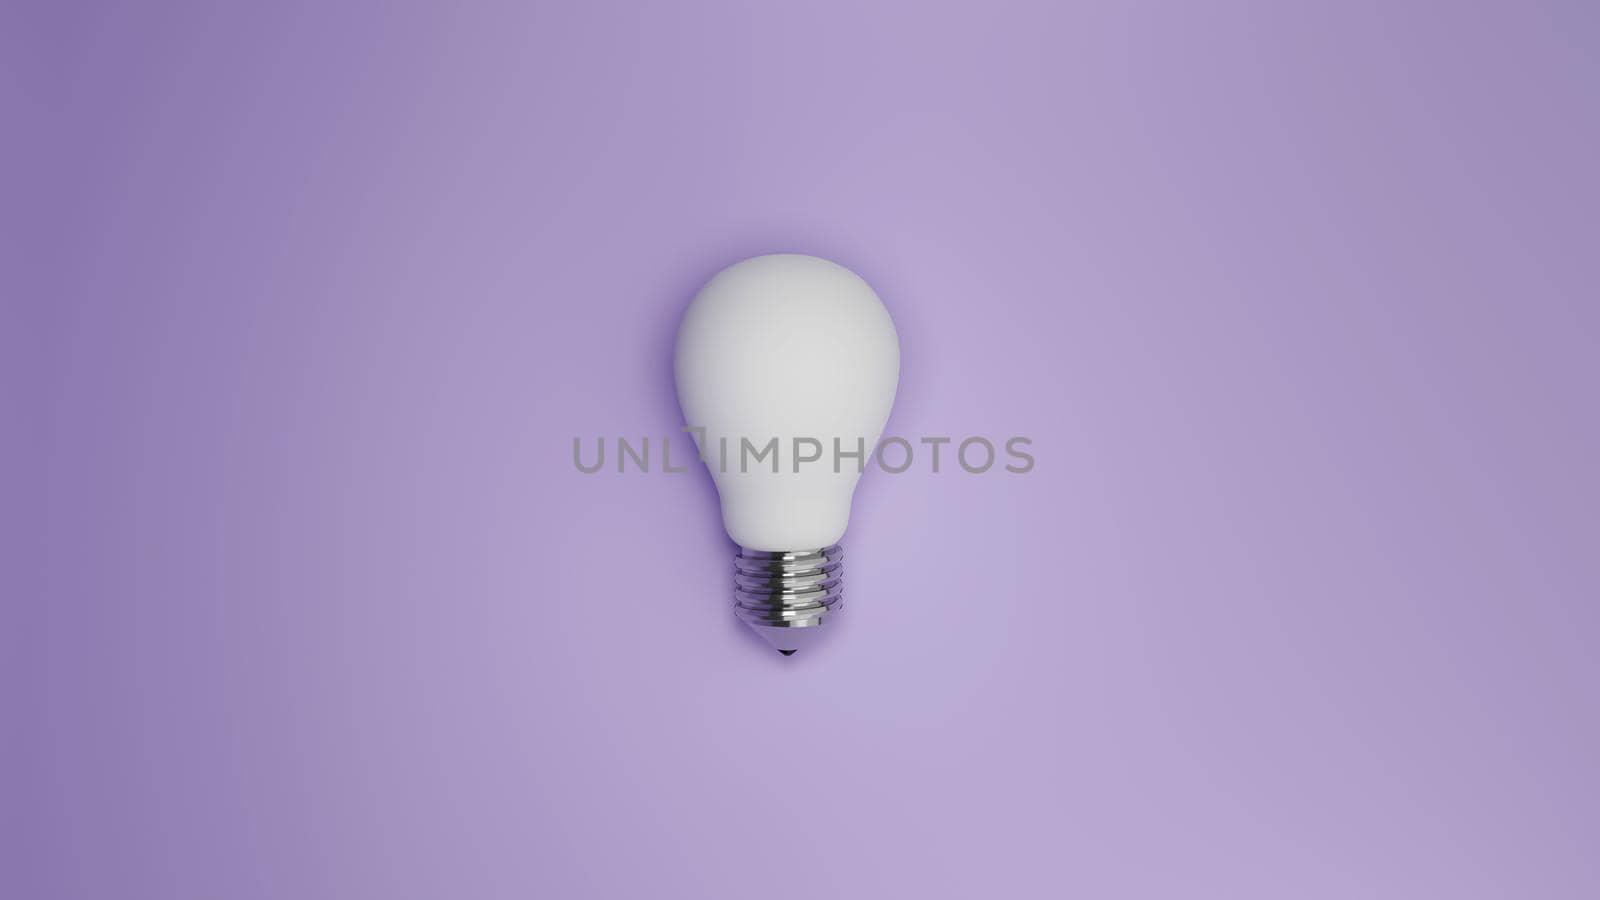 White light bulb on bright purple background in pastel colors.